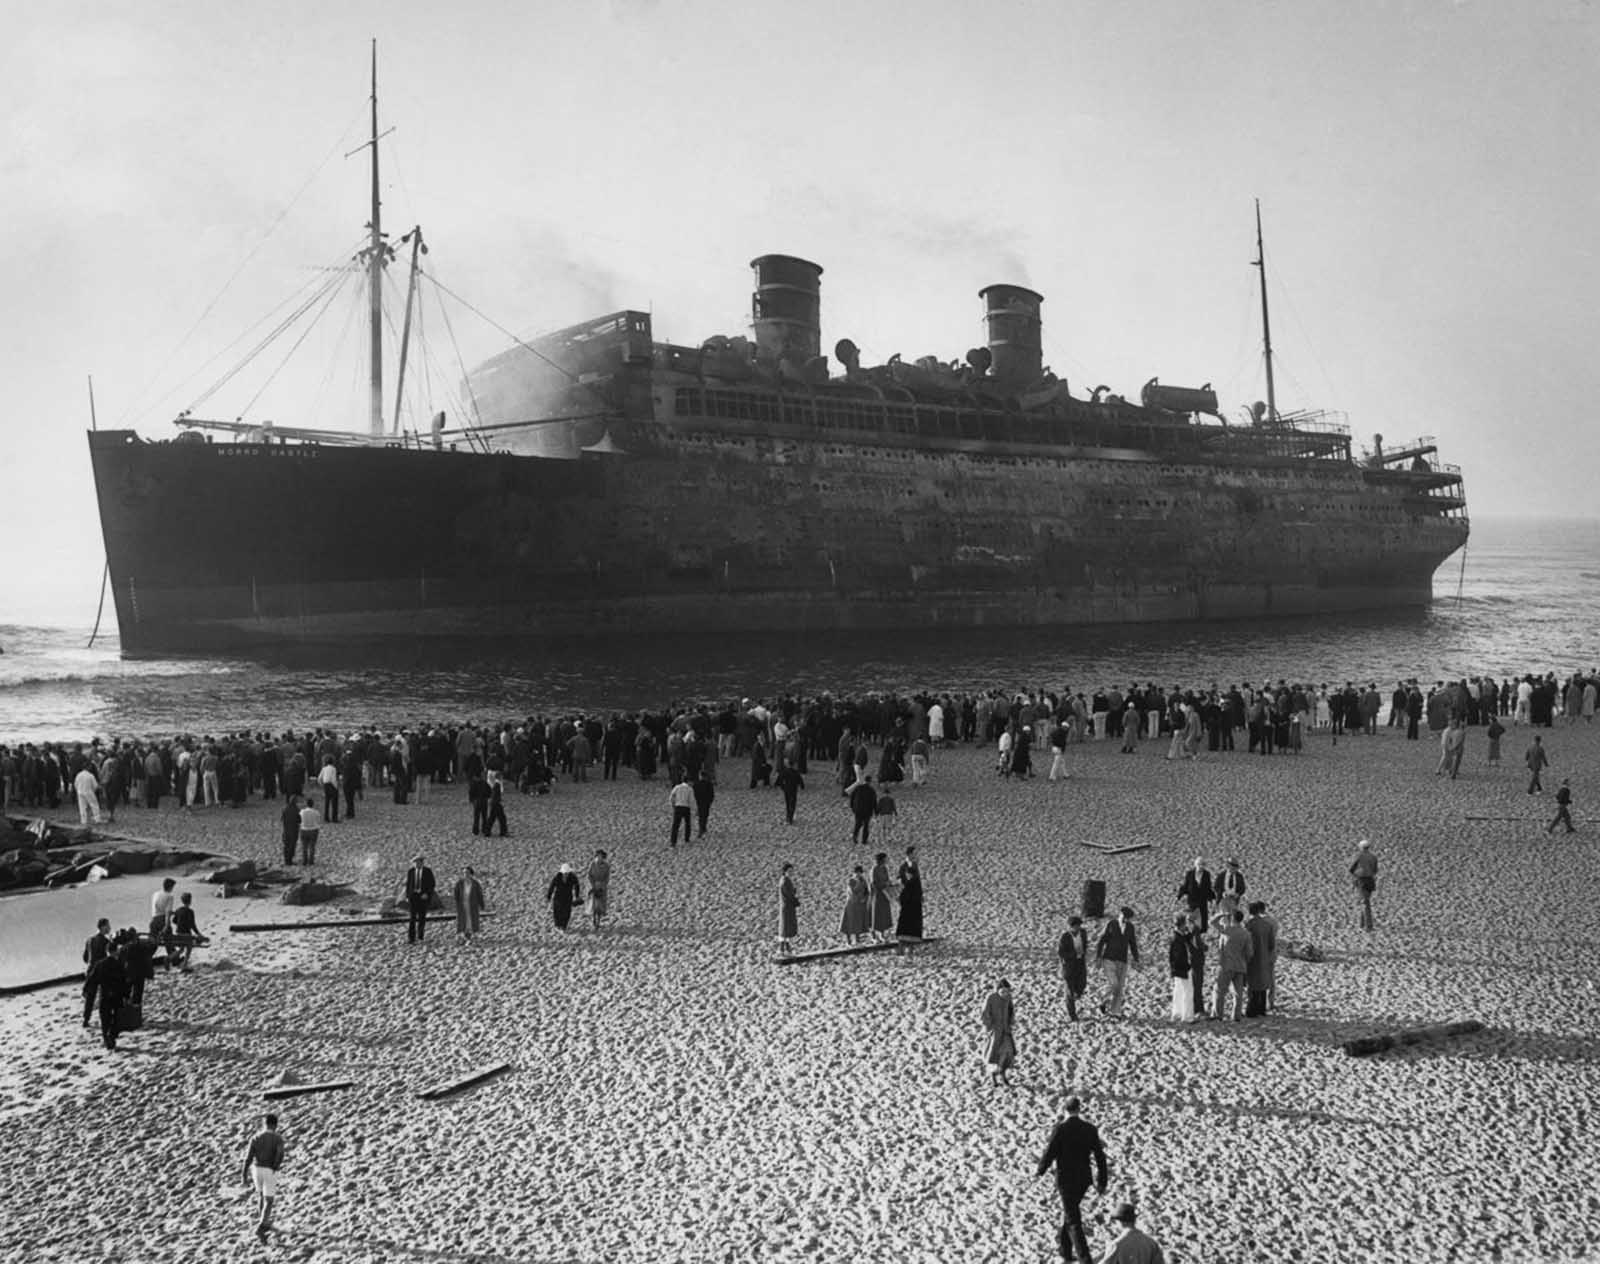 By mid-morning, the ship was totally abandoned and its burning hull drifted ashore, coming to a stop in shallow water off Asbury Park, New Jersey. 